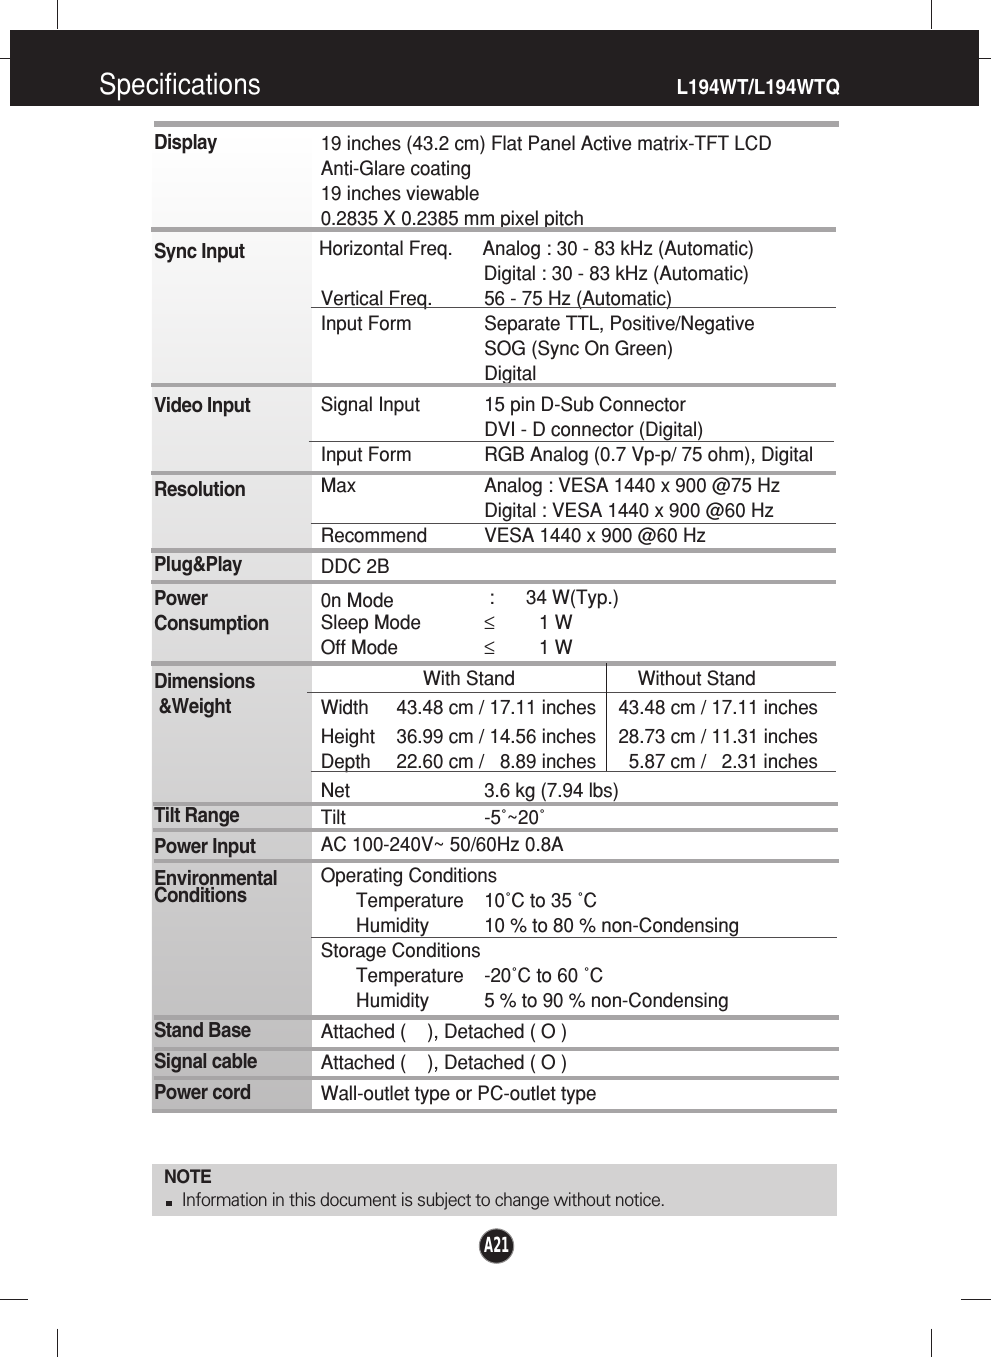 Specifications                                                         L194WT/L194WTQNOTEInformation in this document is subject to change without notice.DisplaySync InputVideo InputResolutionPlug&amp;PlayPowerConsumptionDimensions&amp;WeightTilt RangePower InputEnvironmentalConditionsStand Base Signal cablePower cord 19 inches (43.2 cm) Flat Panel Active matrix-TFT LCD Anti-Glare coating19 inches viewable0.2835 X 0.2385 mm pixel pitchHorizontal Freq. Analog : 30 - 83 kHz (Automatic)Digital : 30 - 83 kHz (Automatic)Vertical Freq. 56 - 75 Hz (Automatic)Input Form Separate TTL, Positive/NegativeSOG (Sync On Green) DigitalSignal Input 15 pin D-Sub ConnectorDVI - D connector (Digital)Input Form RGB Analog (0.7 Vp-p/ 75 ohm), DigitalMax Analog : VESA 1440 x 900 @75 HzDigital : VESA 1440 x 900 @60 HzRecommend VESA 1440 x 900 @60 HzDDC 2B0n Mode : 34 W(Typ.)Sleep Mode ≤1 WOff Mode ≤1 WWith Stand Without StandWidth 43.48 cm / 17.11 inches 43.48 cm / 17.11 inchesHeight 36.99 cm / 14.56 inches 28.73 cm / 11.31 inchesDepth 22.60 cm /   8.89 inches 5.87 cm /   2.31 inchesNet 3.6 kg (7.94 lbs)Tilt -5˚~20˚AC 100-240V~ 50/60Hz 0.8A Operating ConditionsTemperature 10˚C to 35 ˚CHumidity 10 % to 80 % non-CondensingStorage ConditionsTemperature -20˚C to 60 ˚CHumidity 5 % to 90 % non-CondensingAttached (    ), Detached ( O )Attached (    ), Detached ( O )Wall-outlet type or PC-outlet typeA21